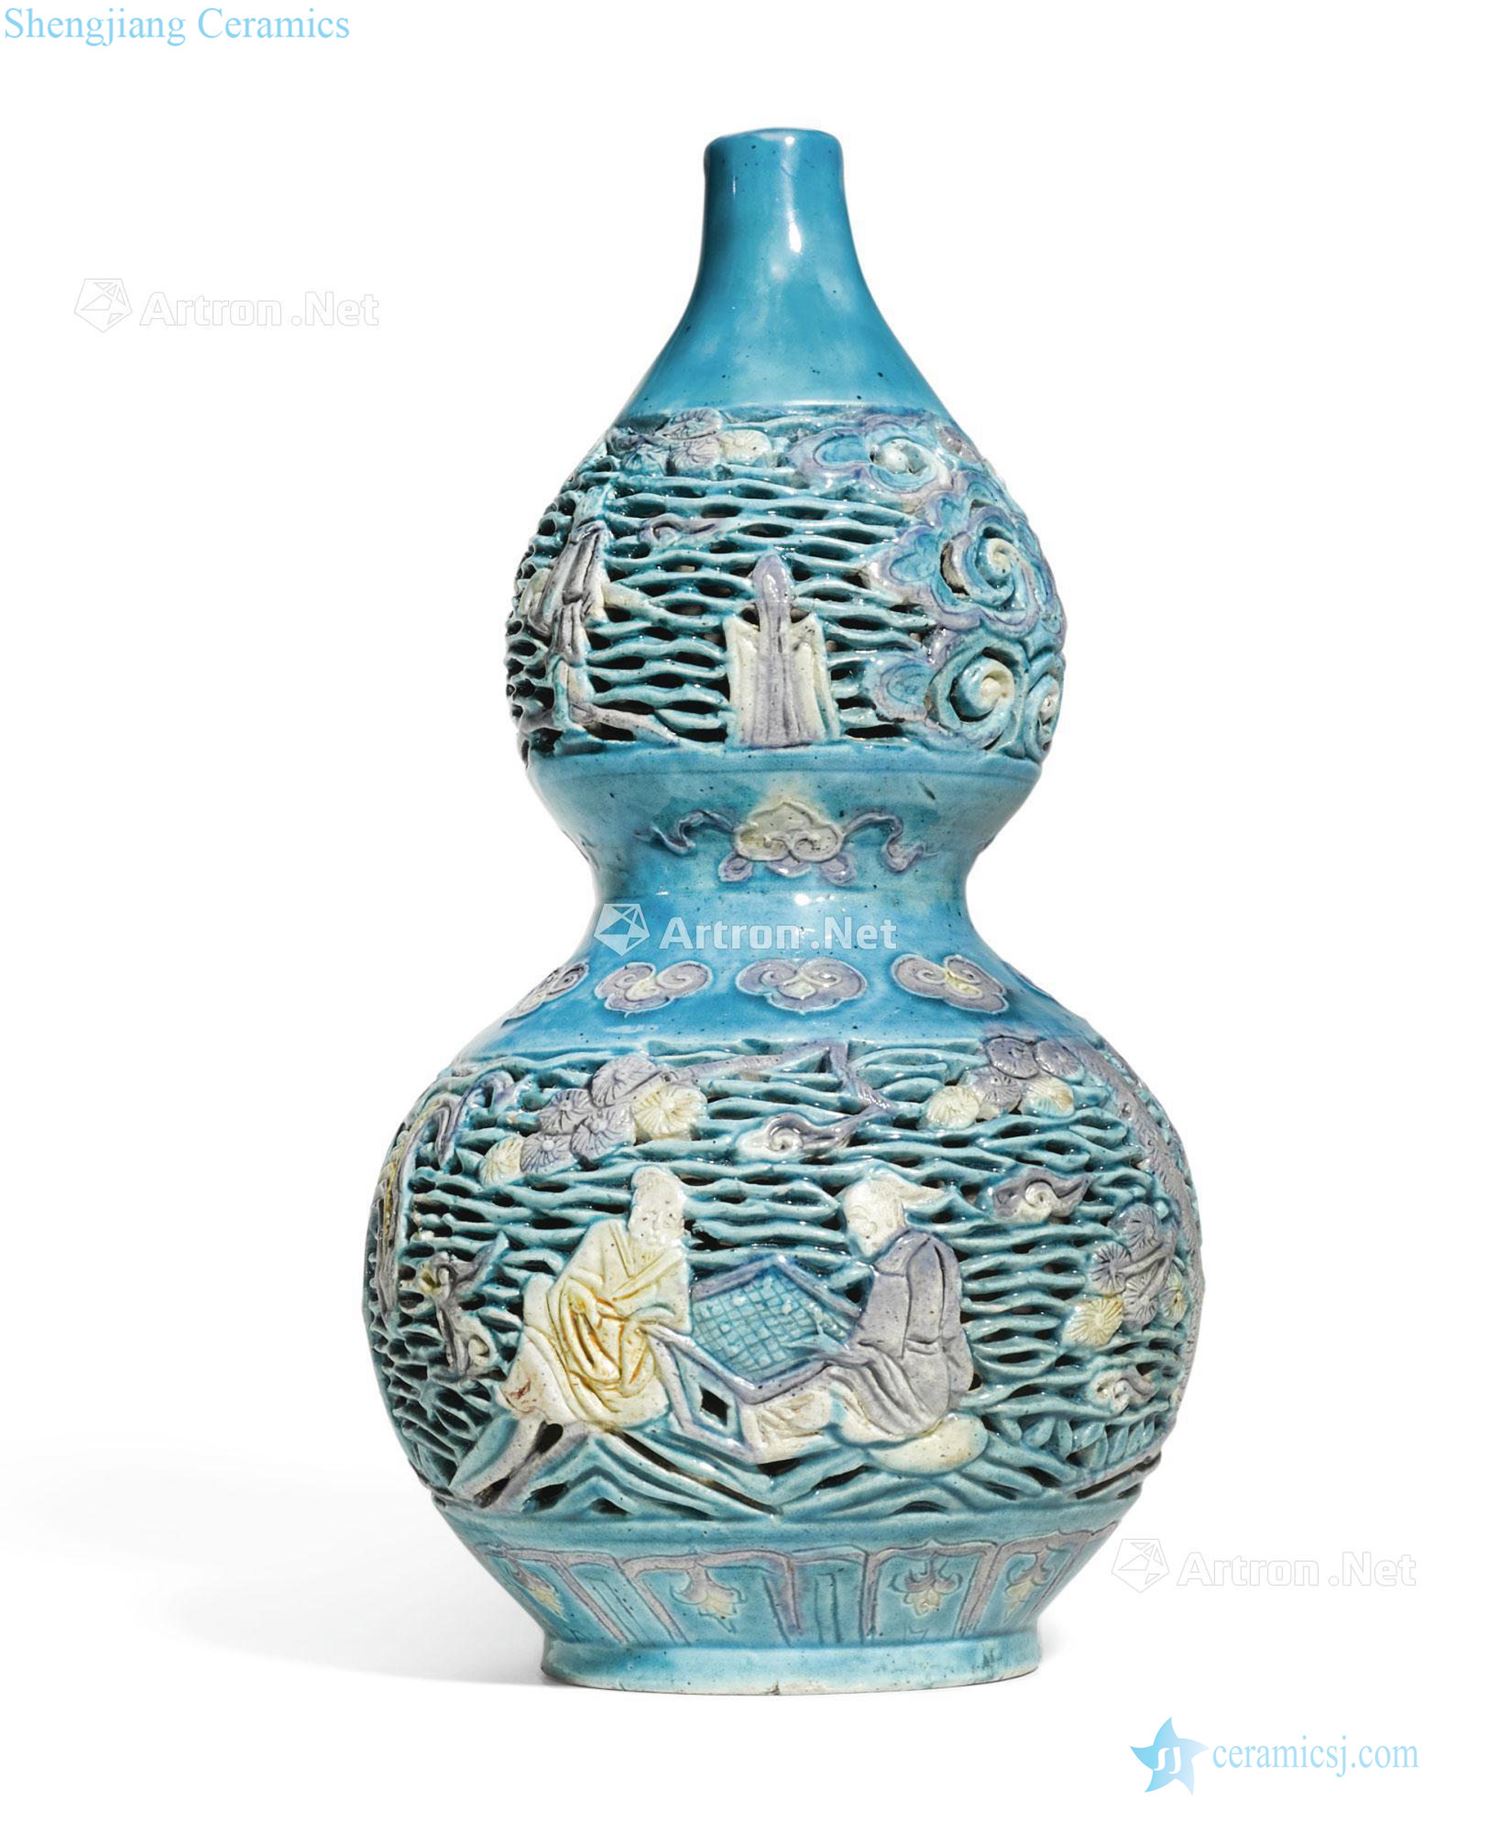 The 16th century Ming Methods China engraved look to raise chart gourd bottle